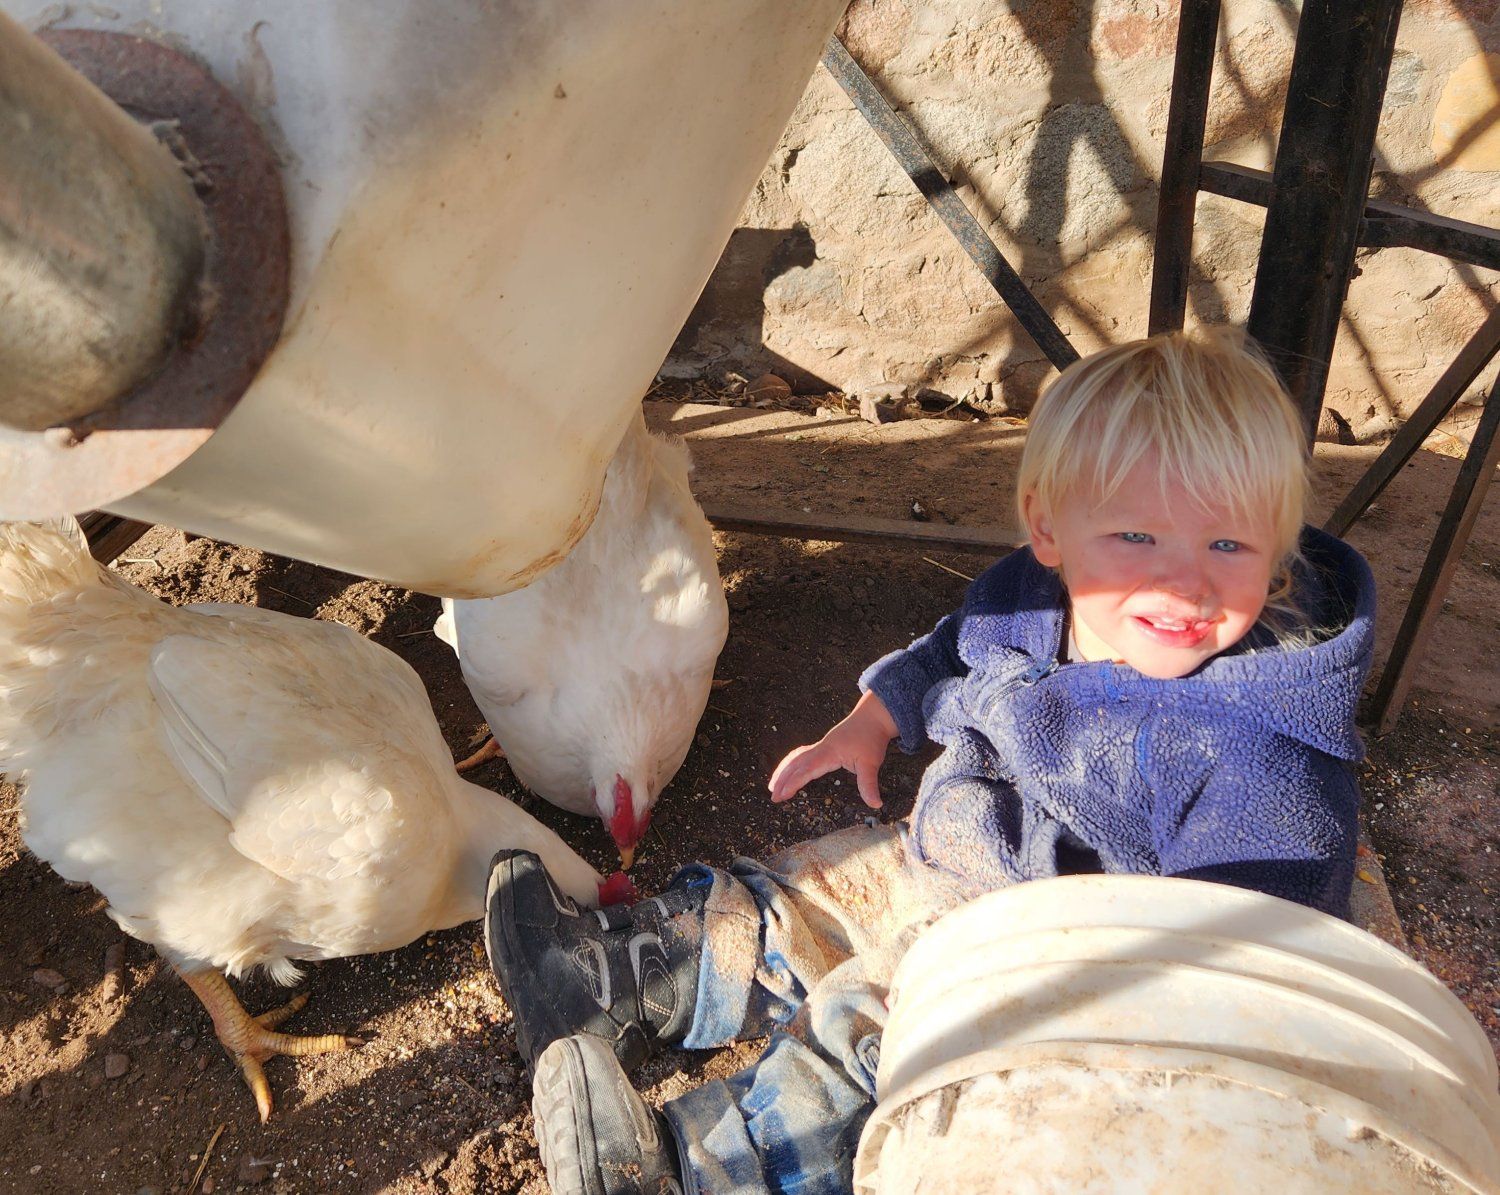 Next Happening: Farm Happening/ Newsletter February 22nd - Featuring Heritage Acres